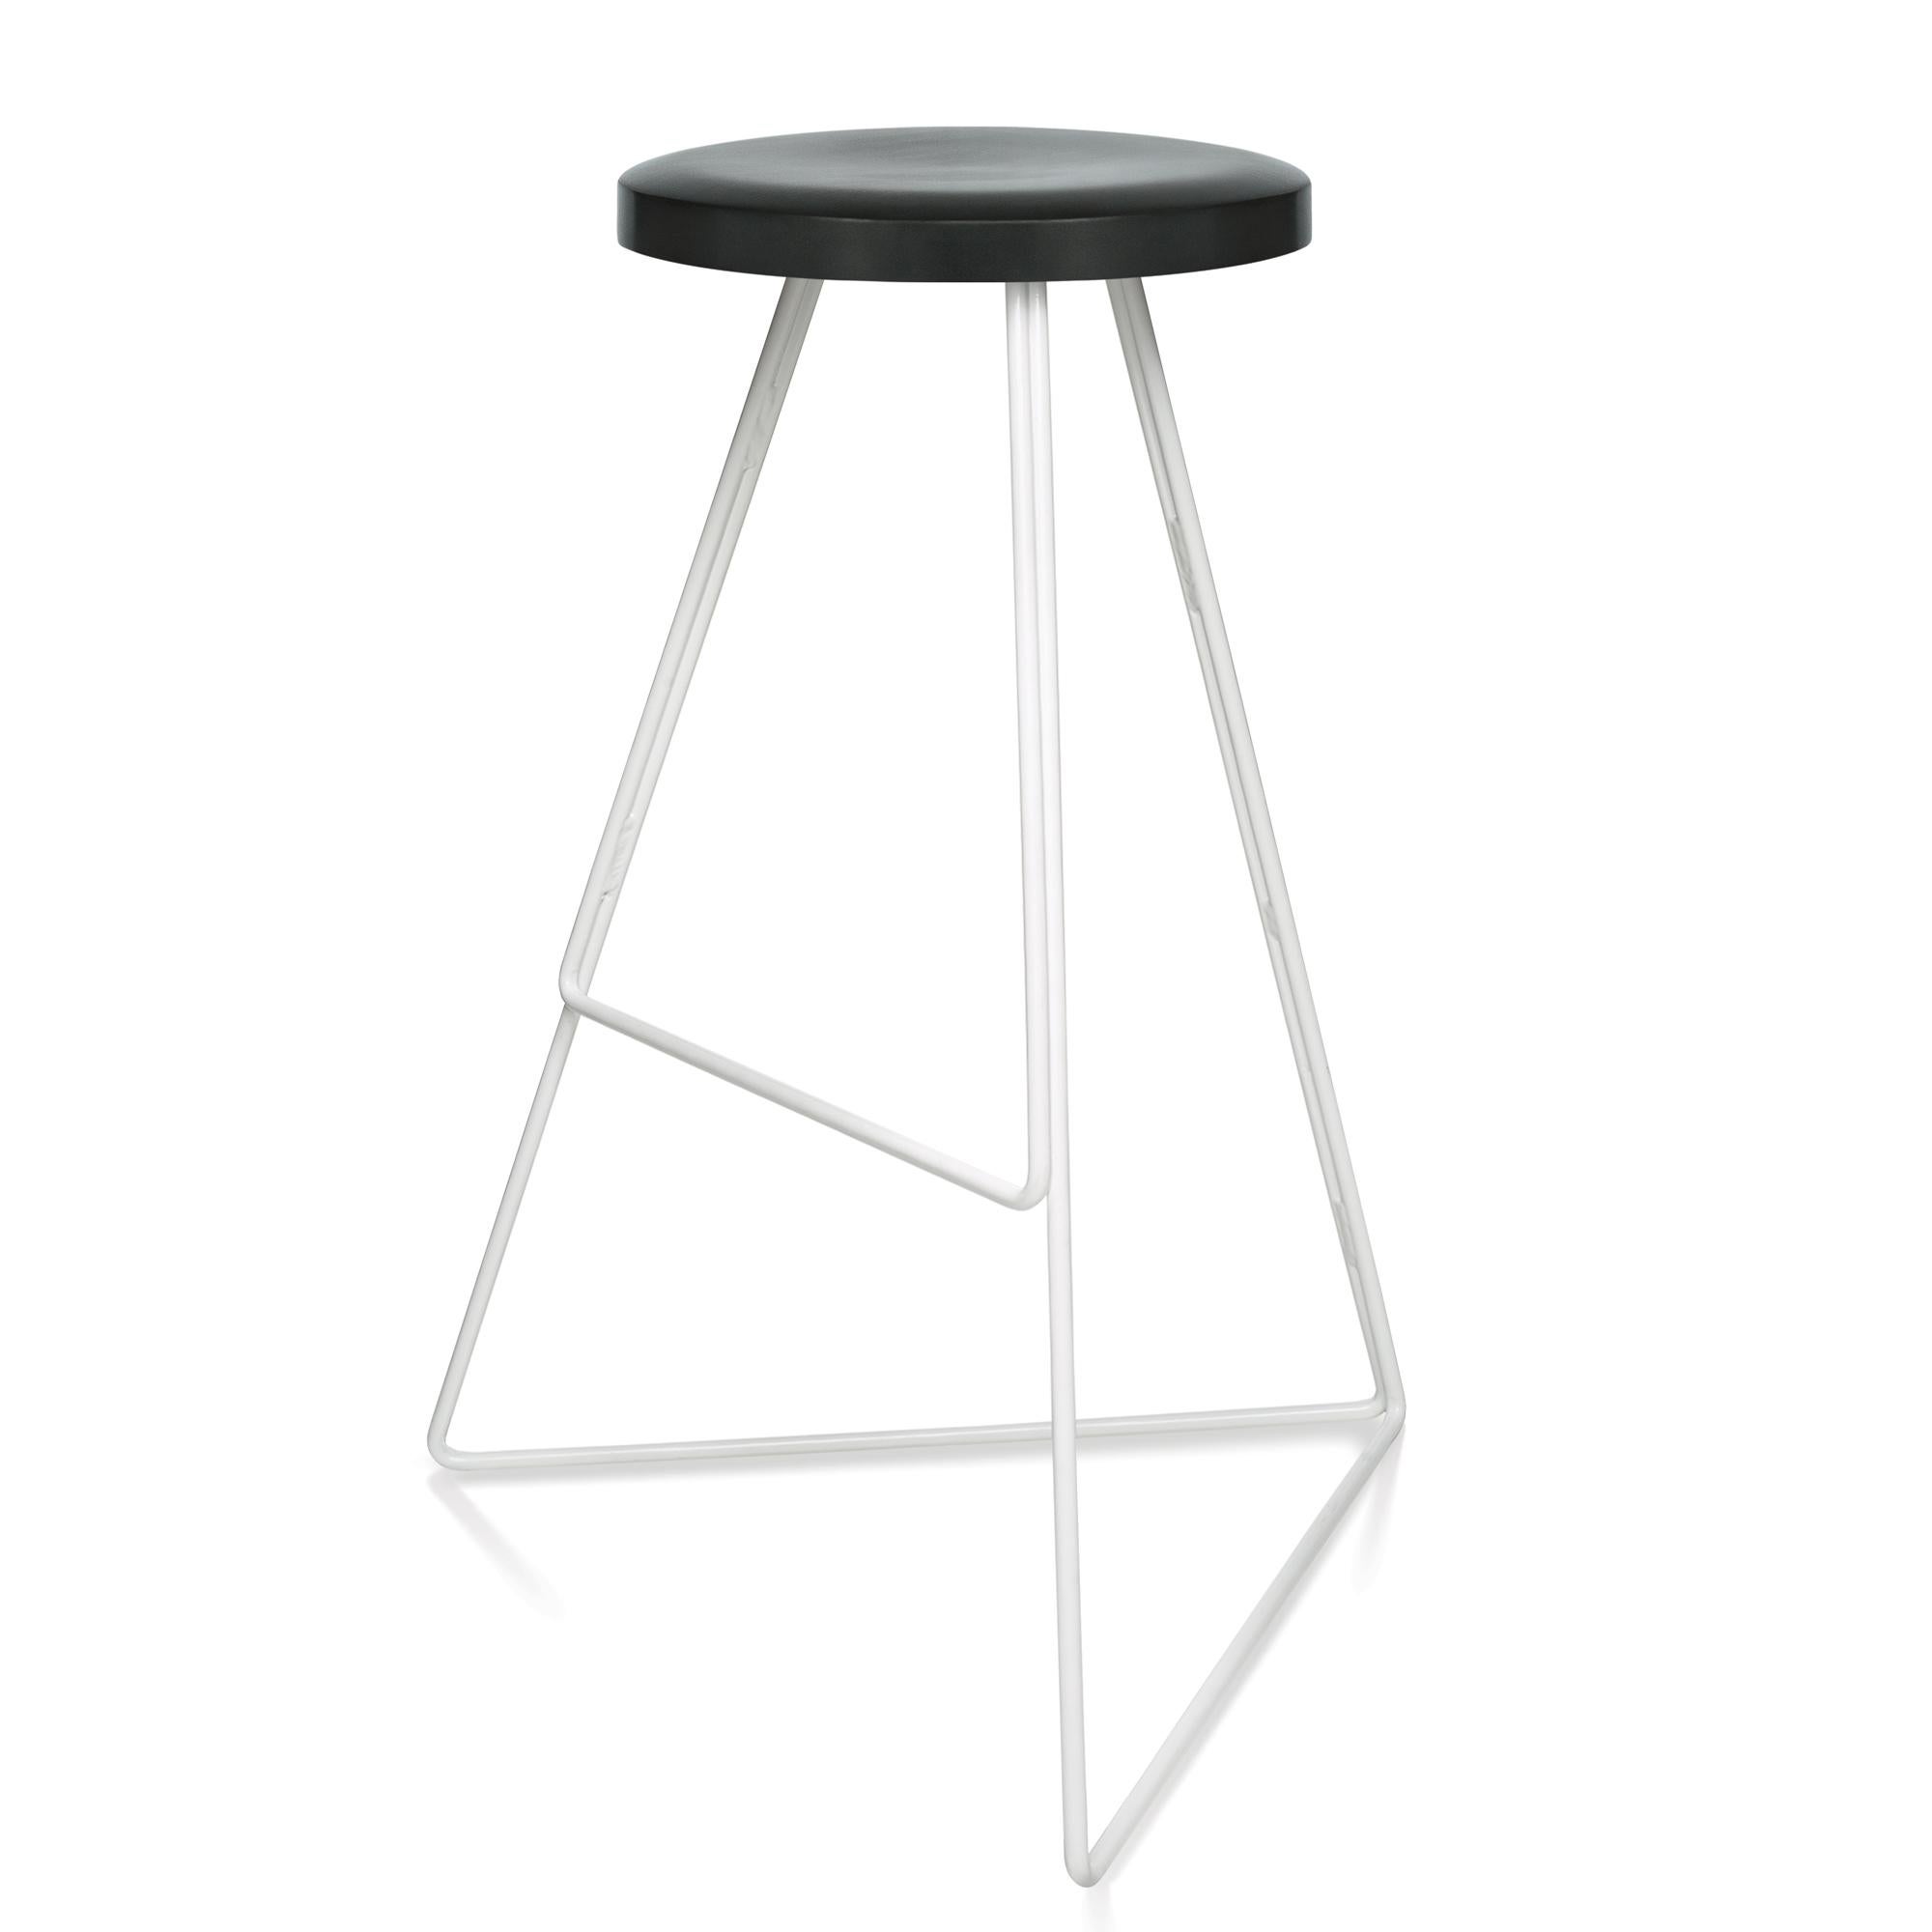 Powder-Coated Coleman Stool, White and Charcoal, Counter Height For Sale